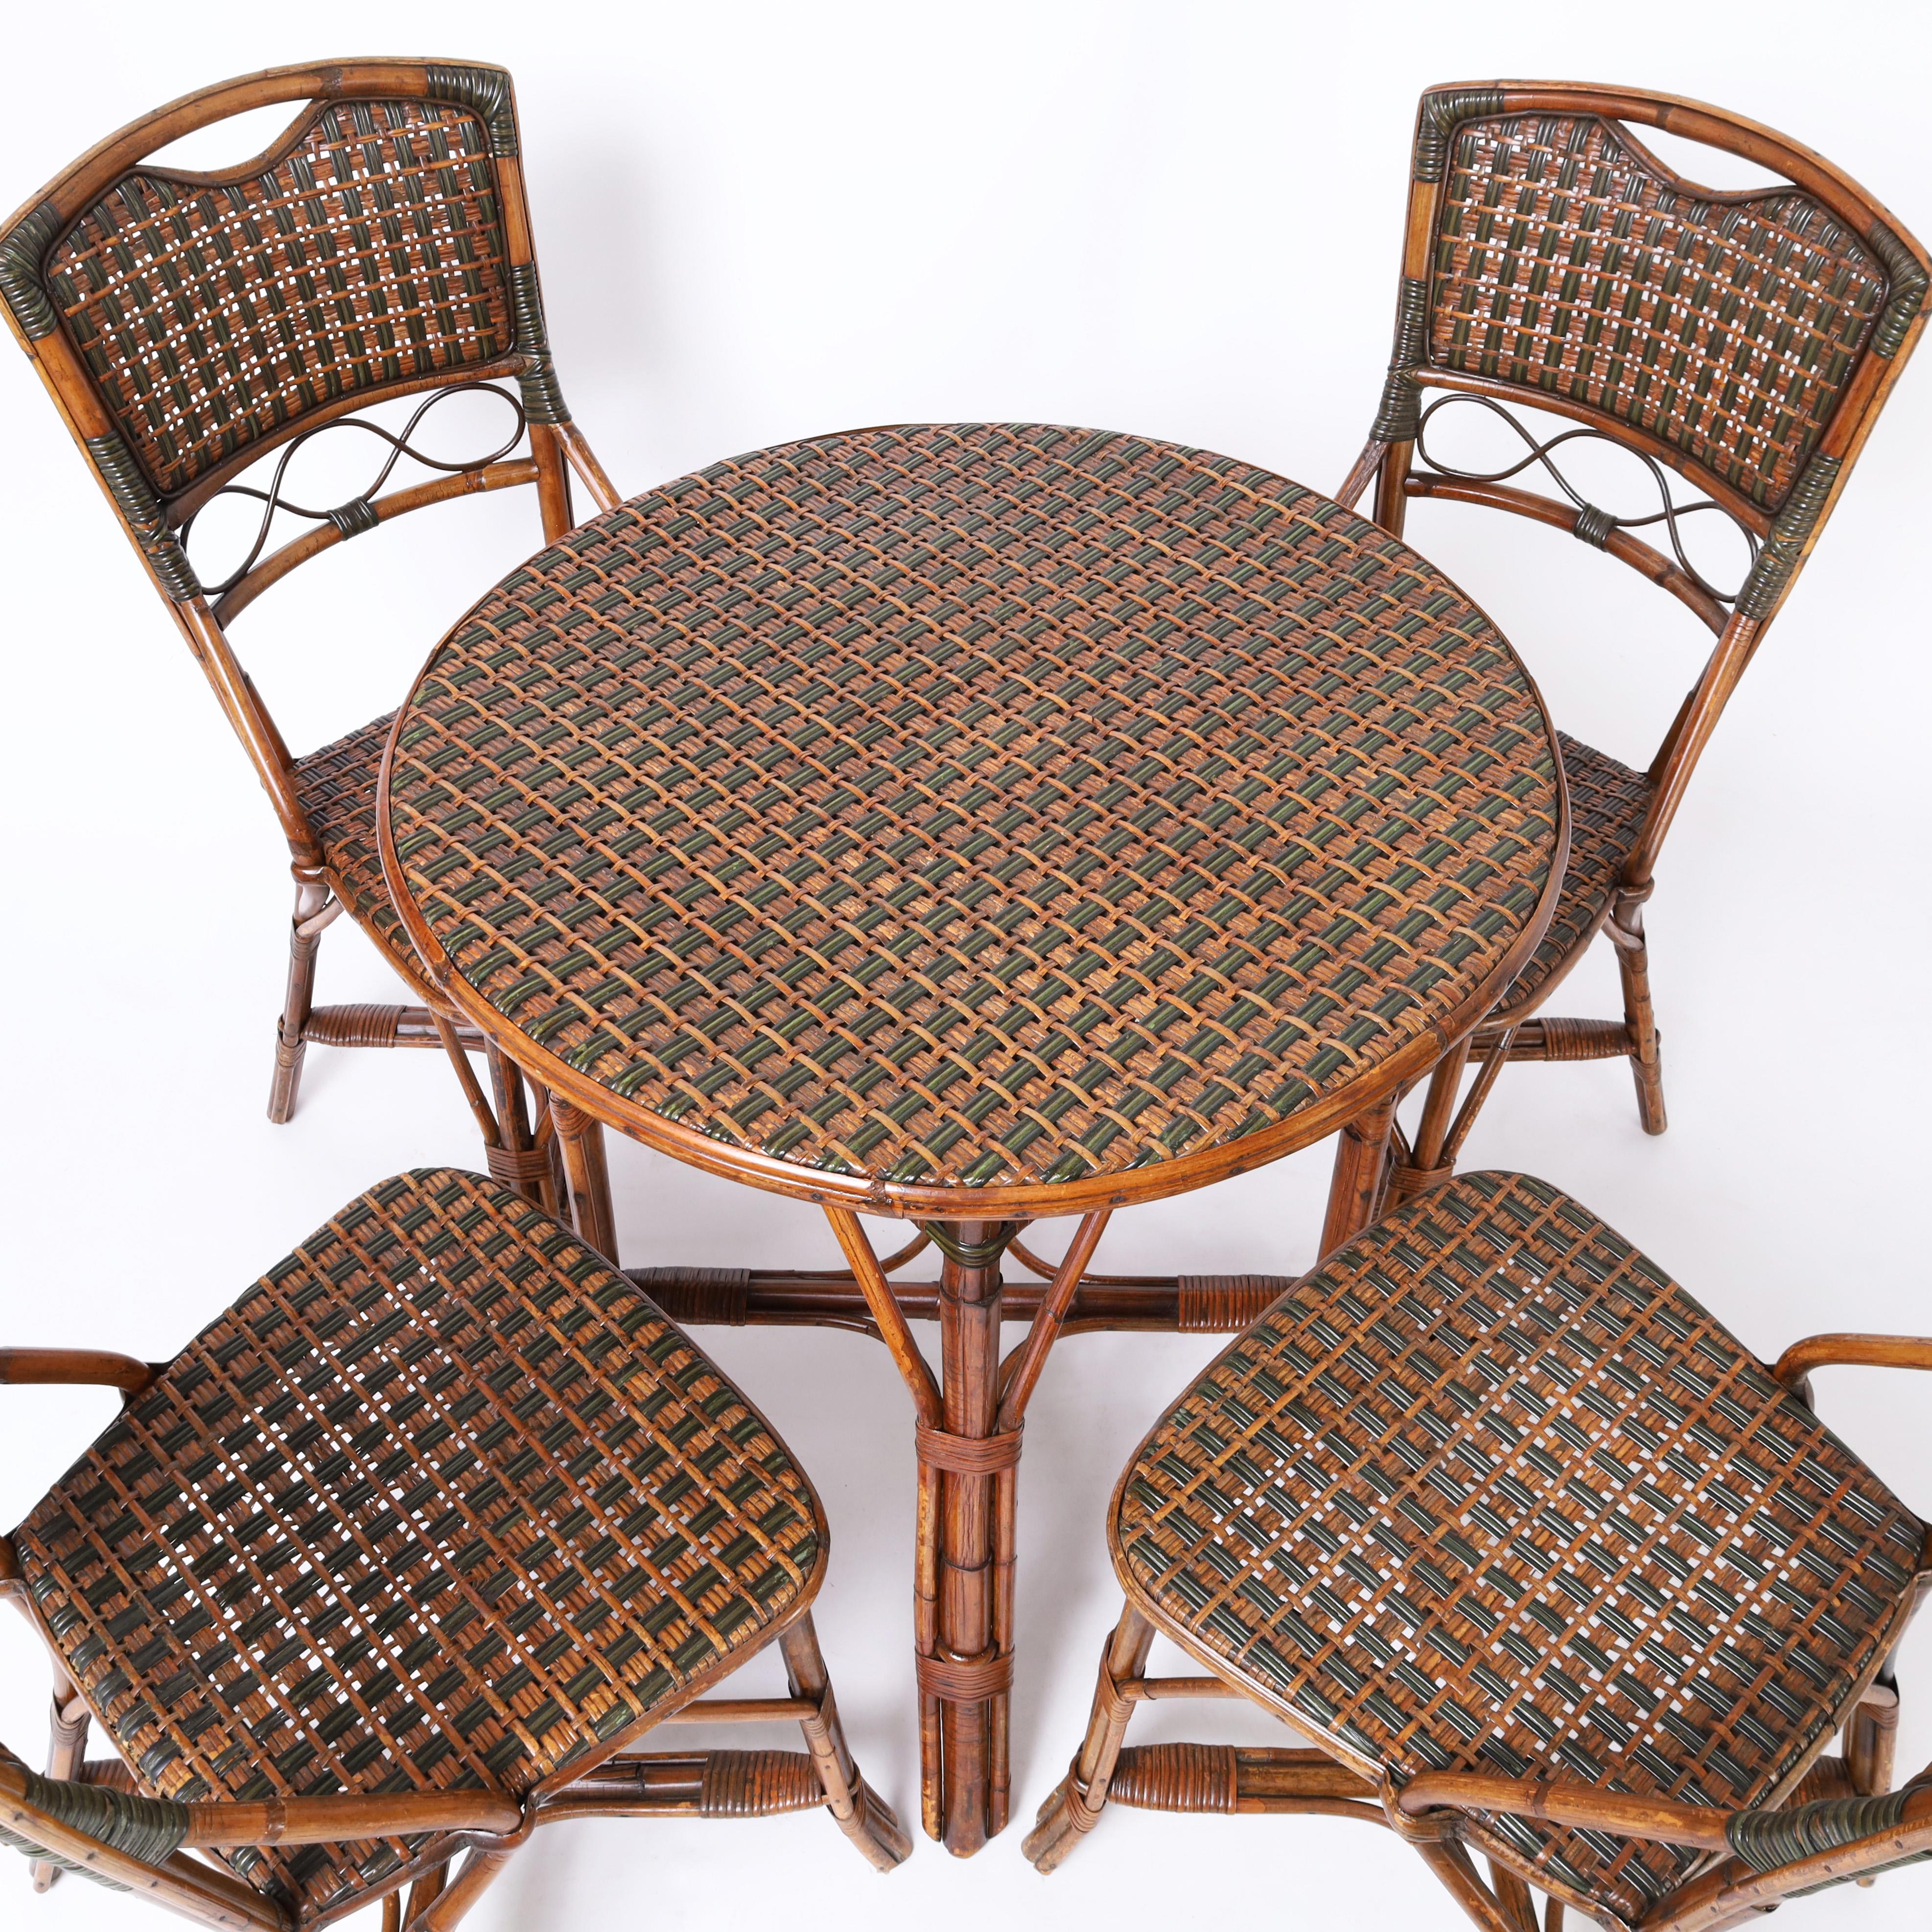 Transporting mid century French bistro round table and four chairs crafted in bamboo with rattan and painted rattan woven table top and chair seats and backs. Bon Appétit!

Table: H: 30 DM: 26
Chairs: H: 35 W: 16 D: 21
Seat: 18